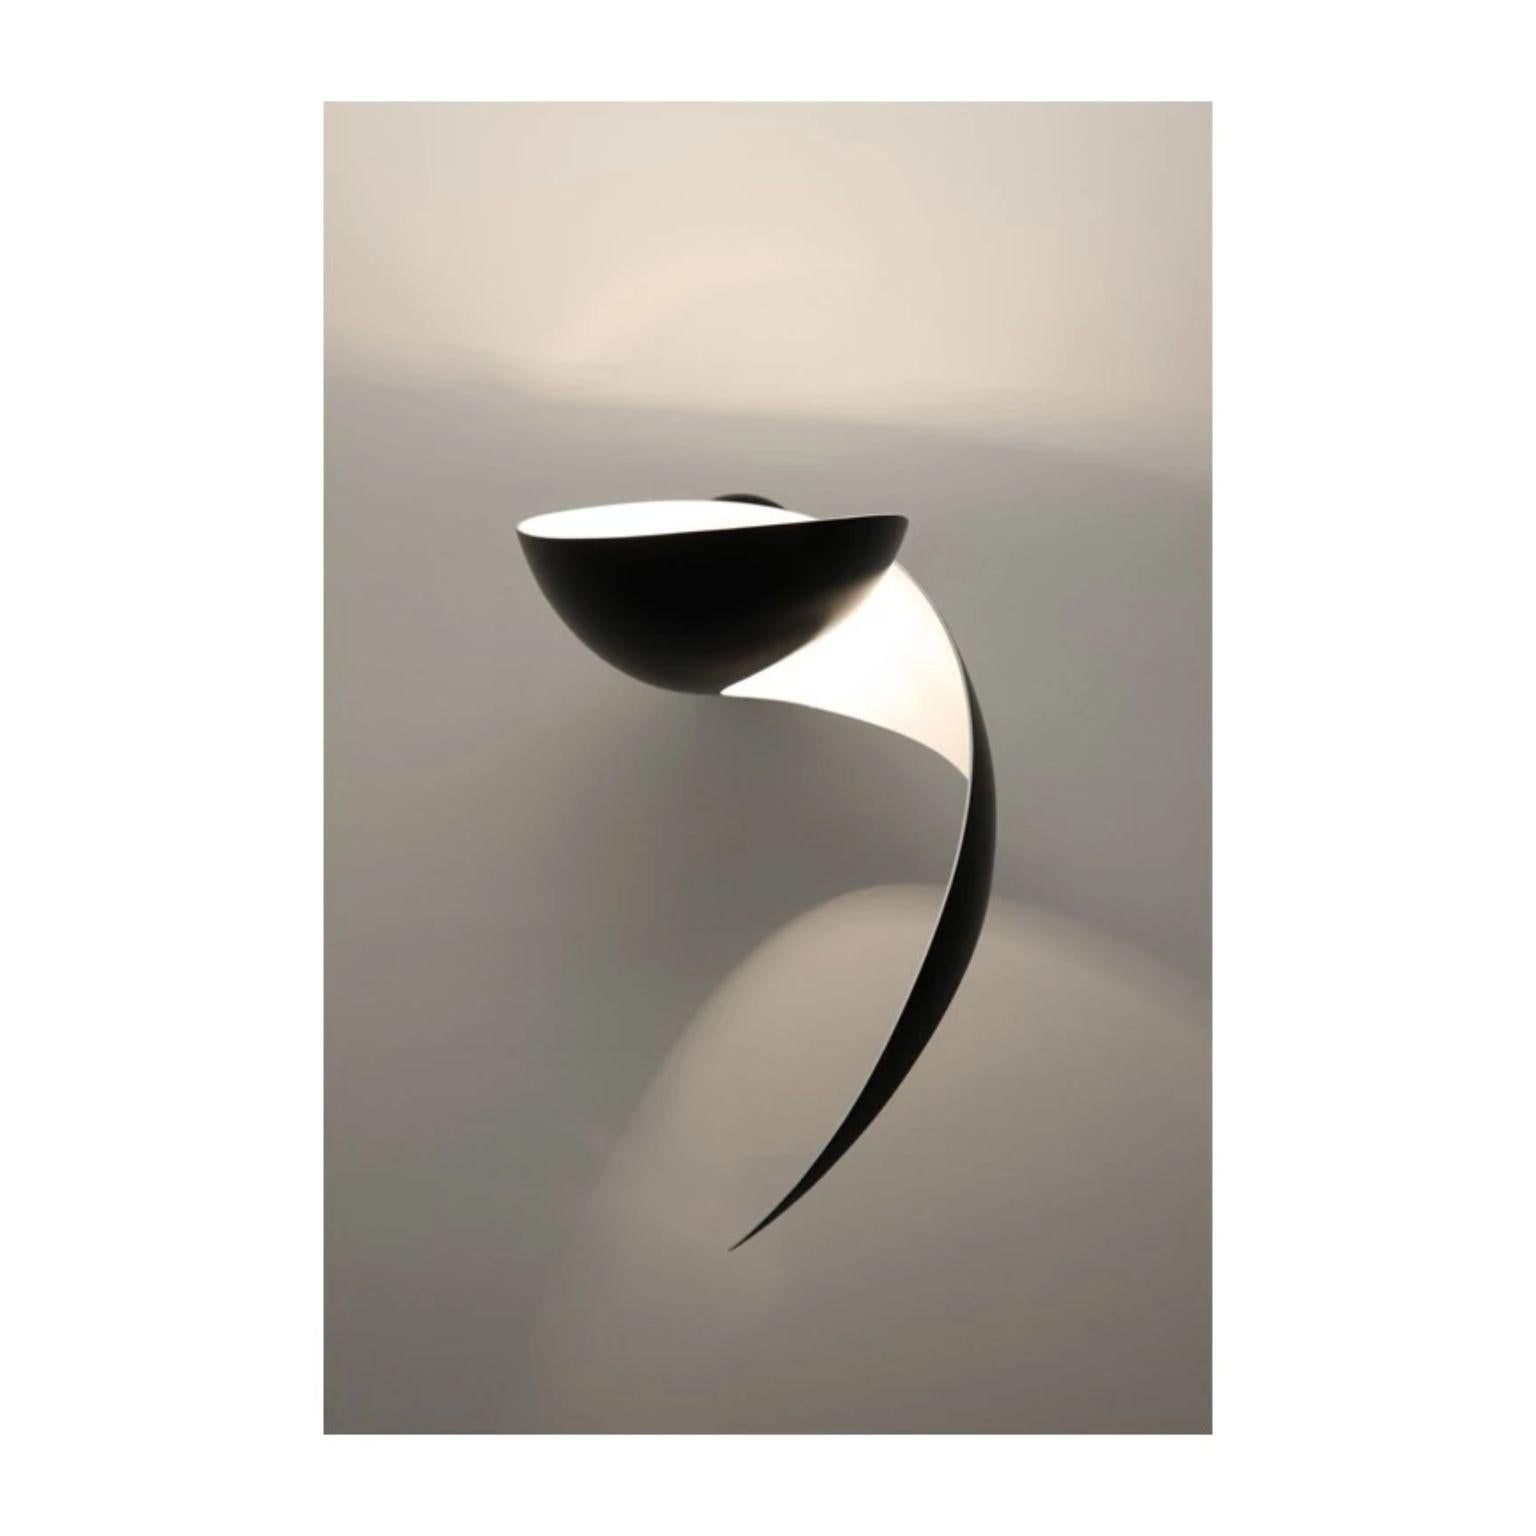 Sconce flame by Serge Mouille
Dimensions: D25 x H30 cm
Materials: Brass, Steel, Aluminium
One of a King. Numbered.
Also available in different colour.

All our lamps can be wired according to each country. If sold to the USA it will be wired